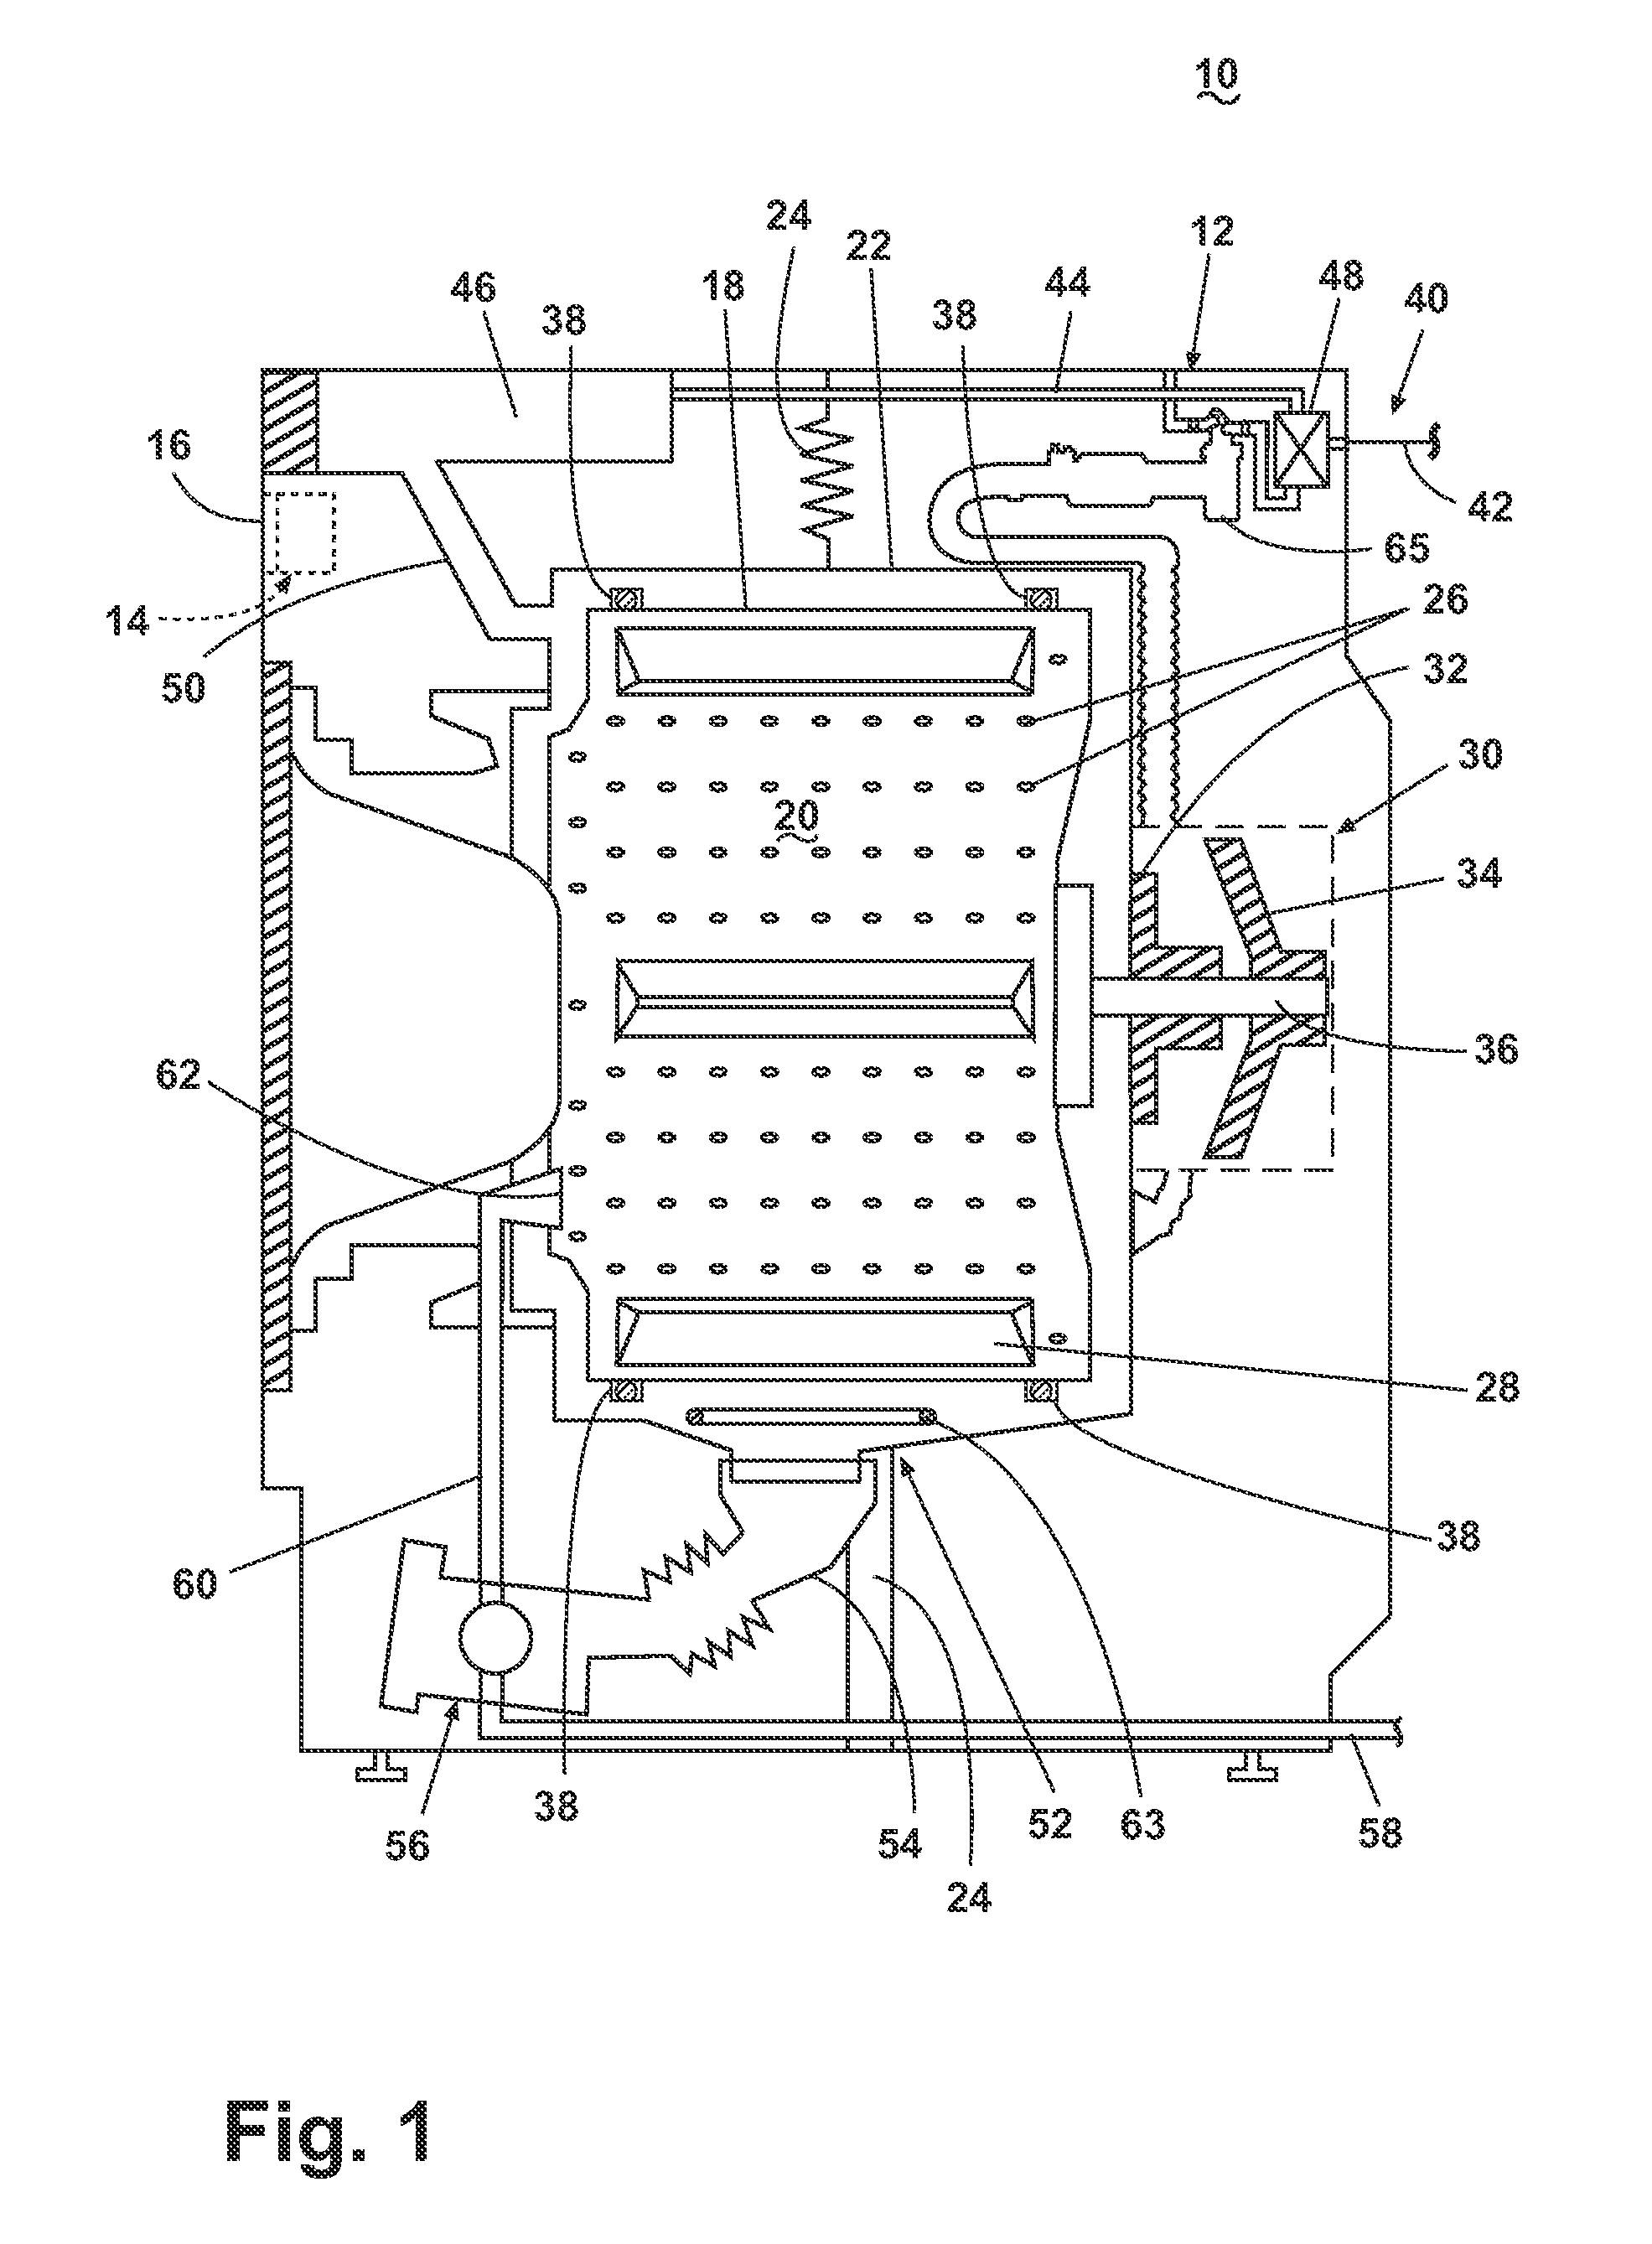 Method and apparatus for redistributing an imbalance in a laundry treating appliance